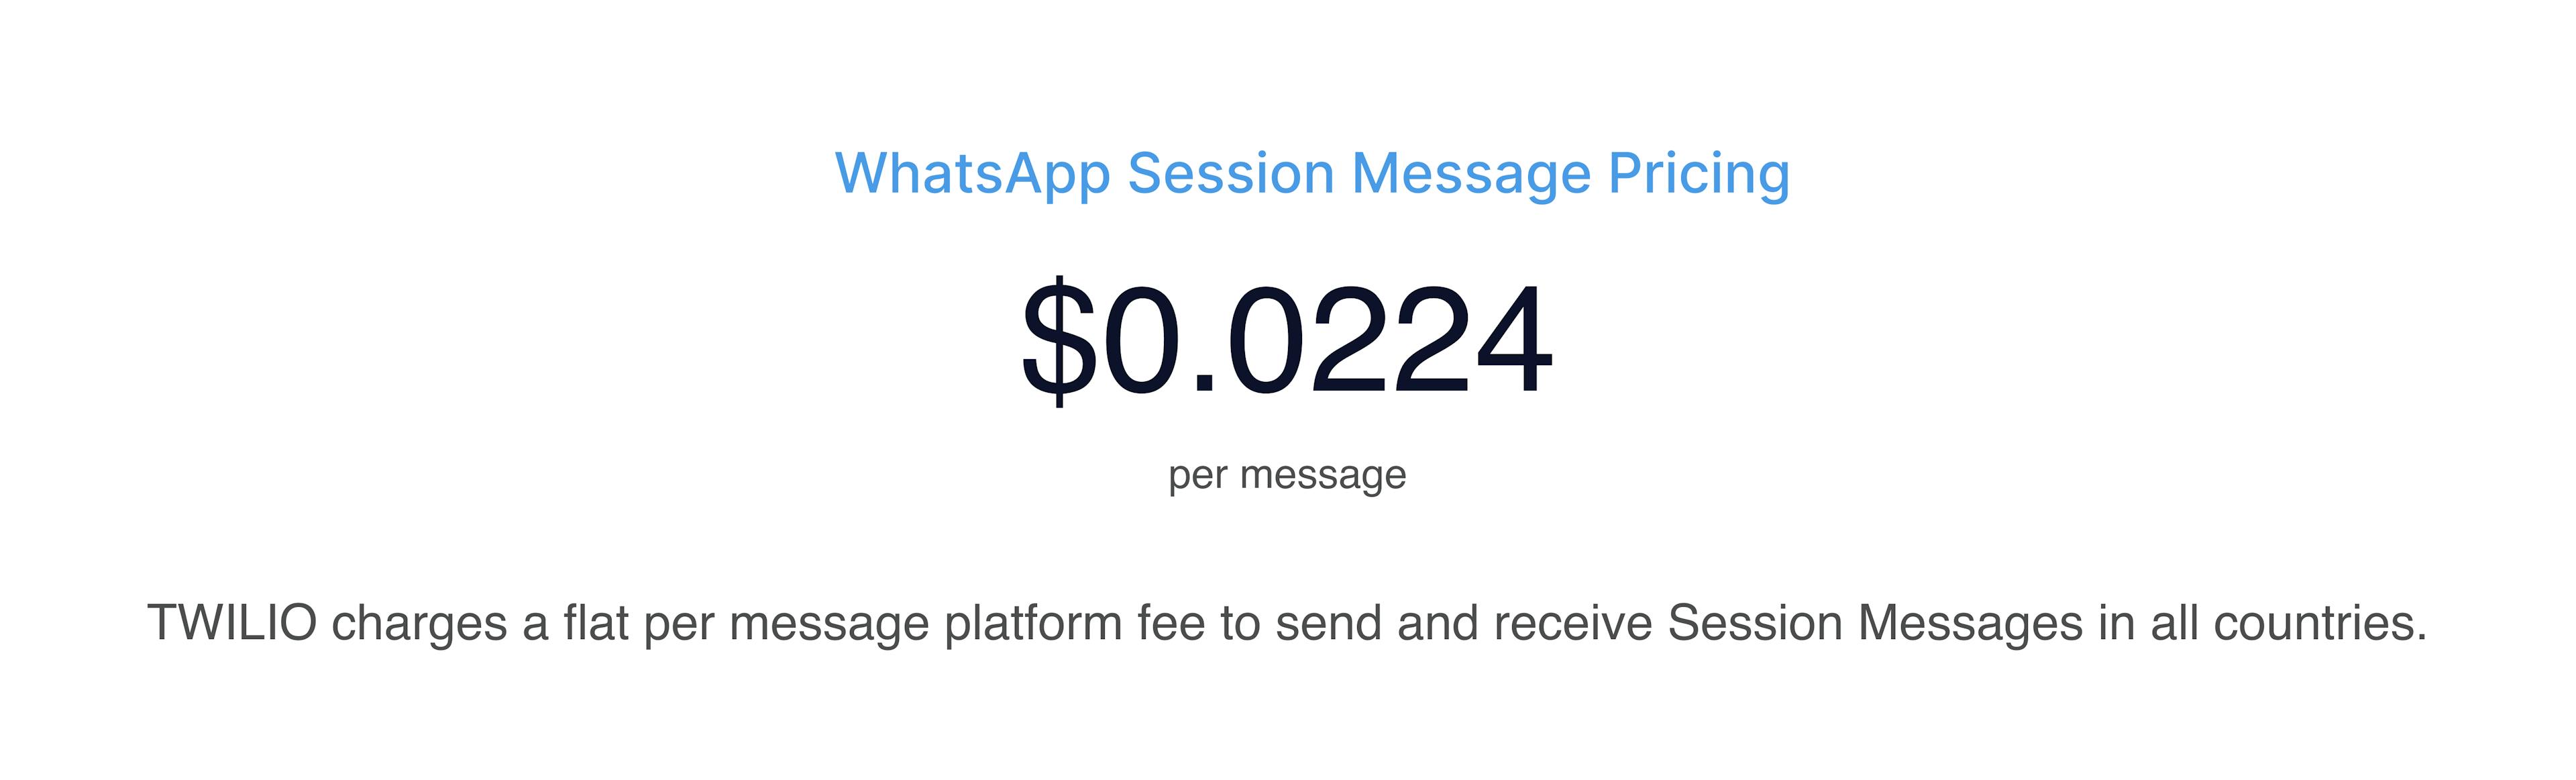 WhatsApp session message pricing